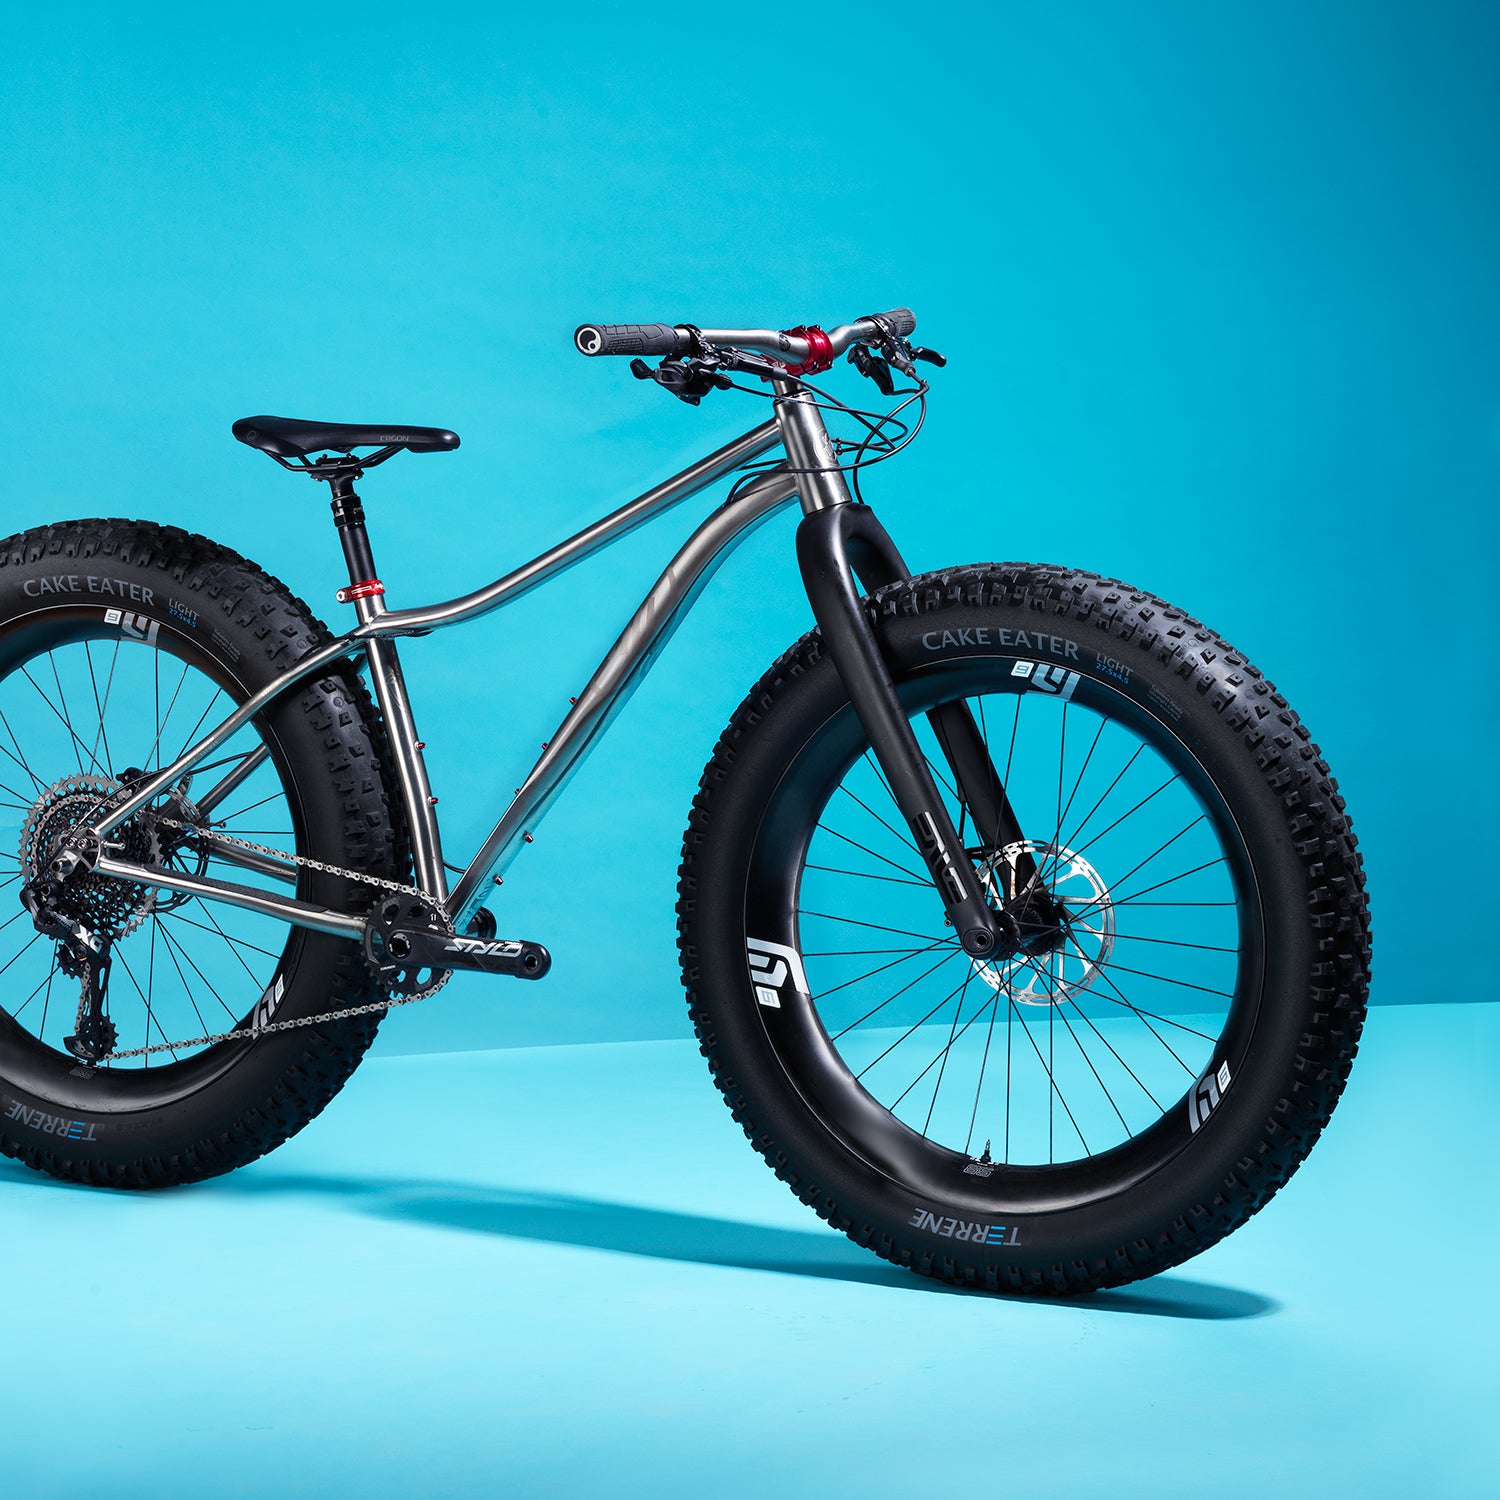 The Best Fat Bikes of 2020